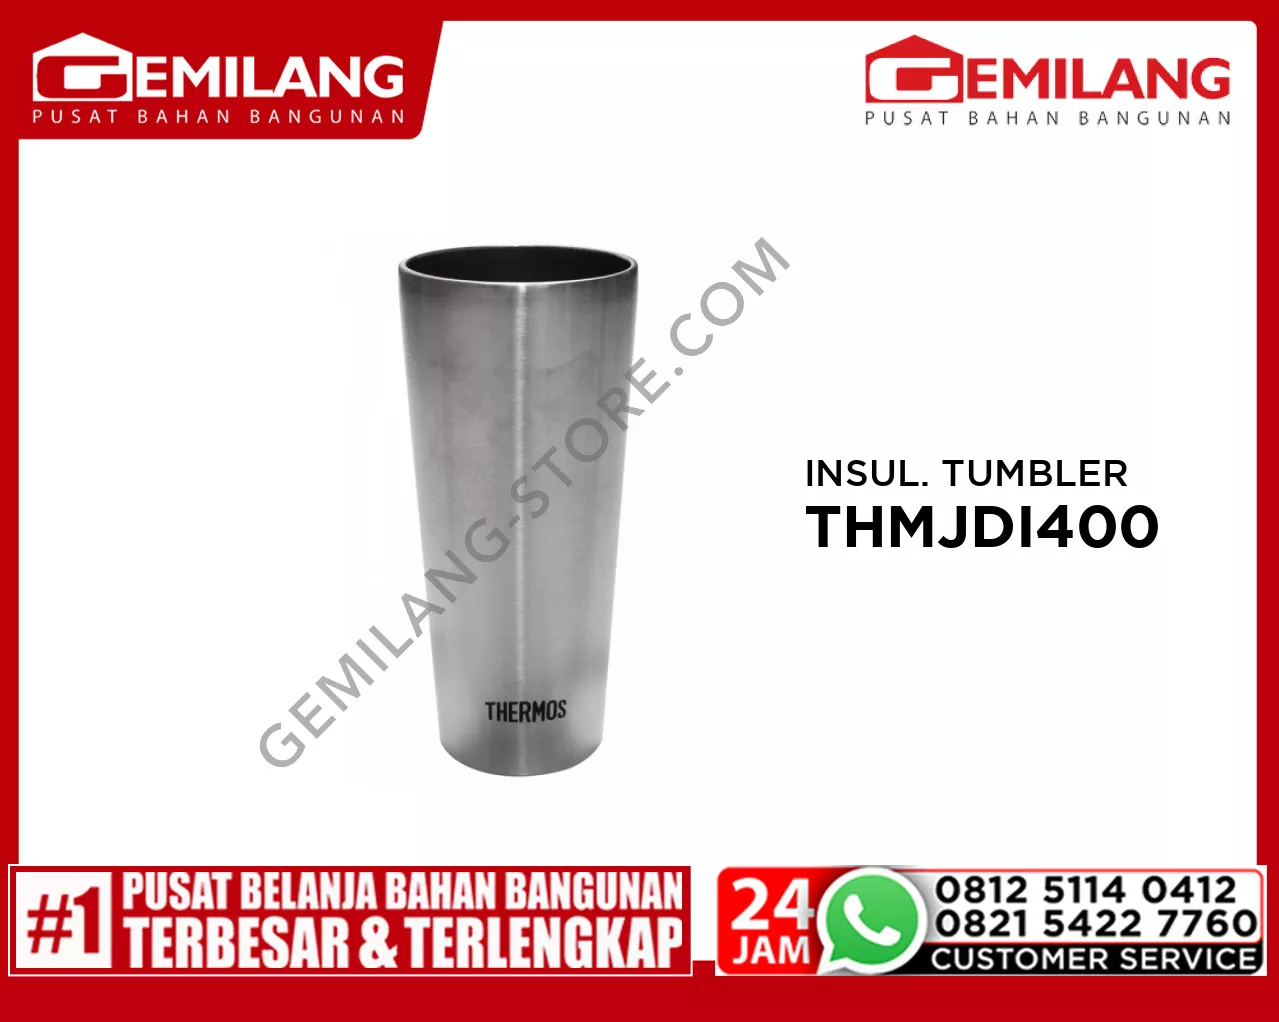 THERMOS STAINLESS STEEL VACUUM INSULATED TUMBLER THMJDI400